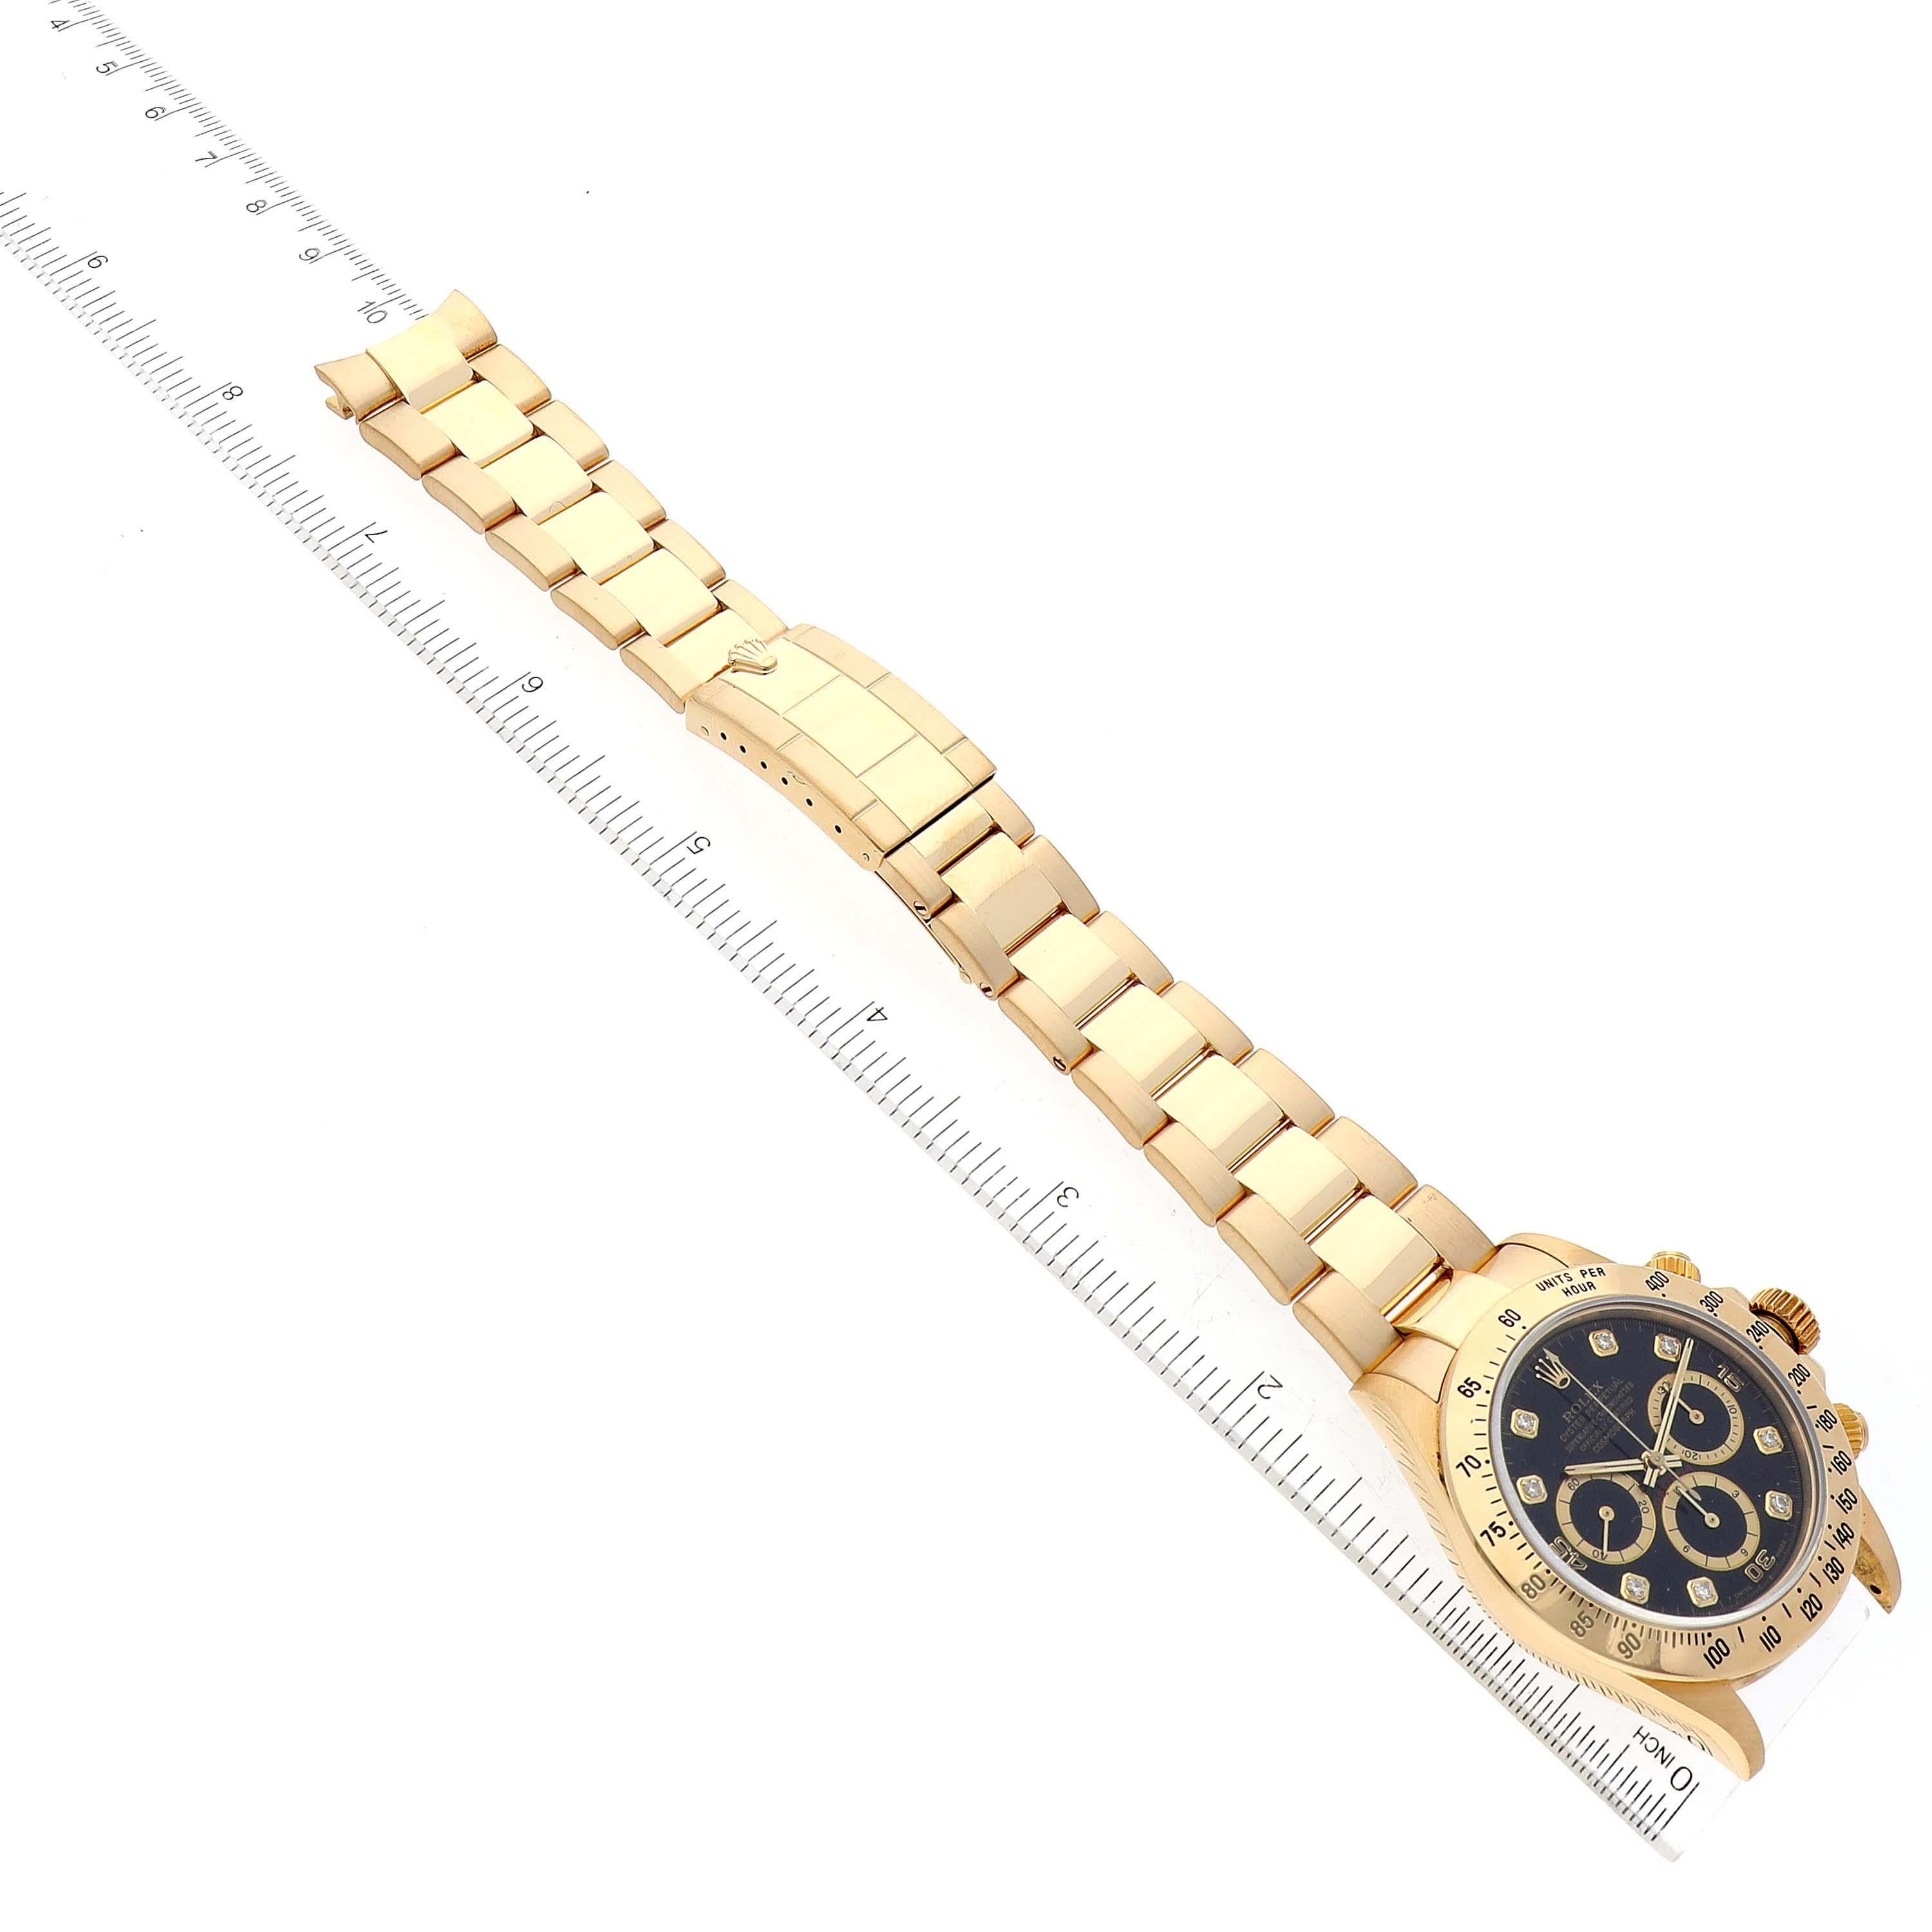 Rolex Daytona Yellow Gold Inverted 6 Diamond Dial Mens Watch 16528 For Sale 7